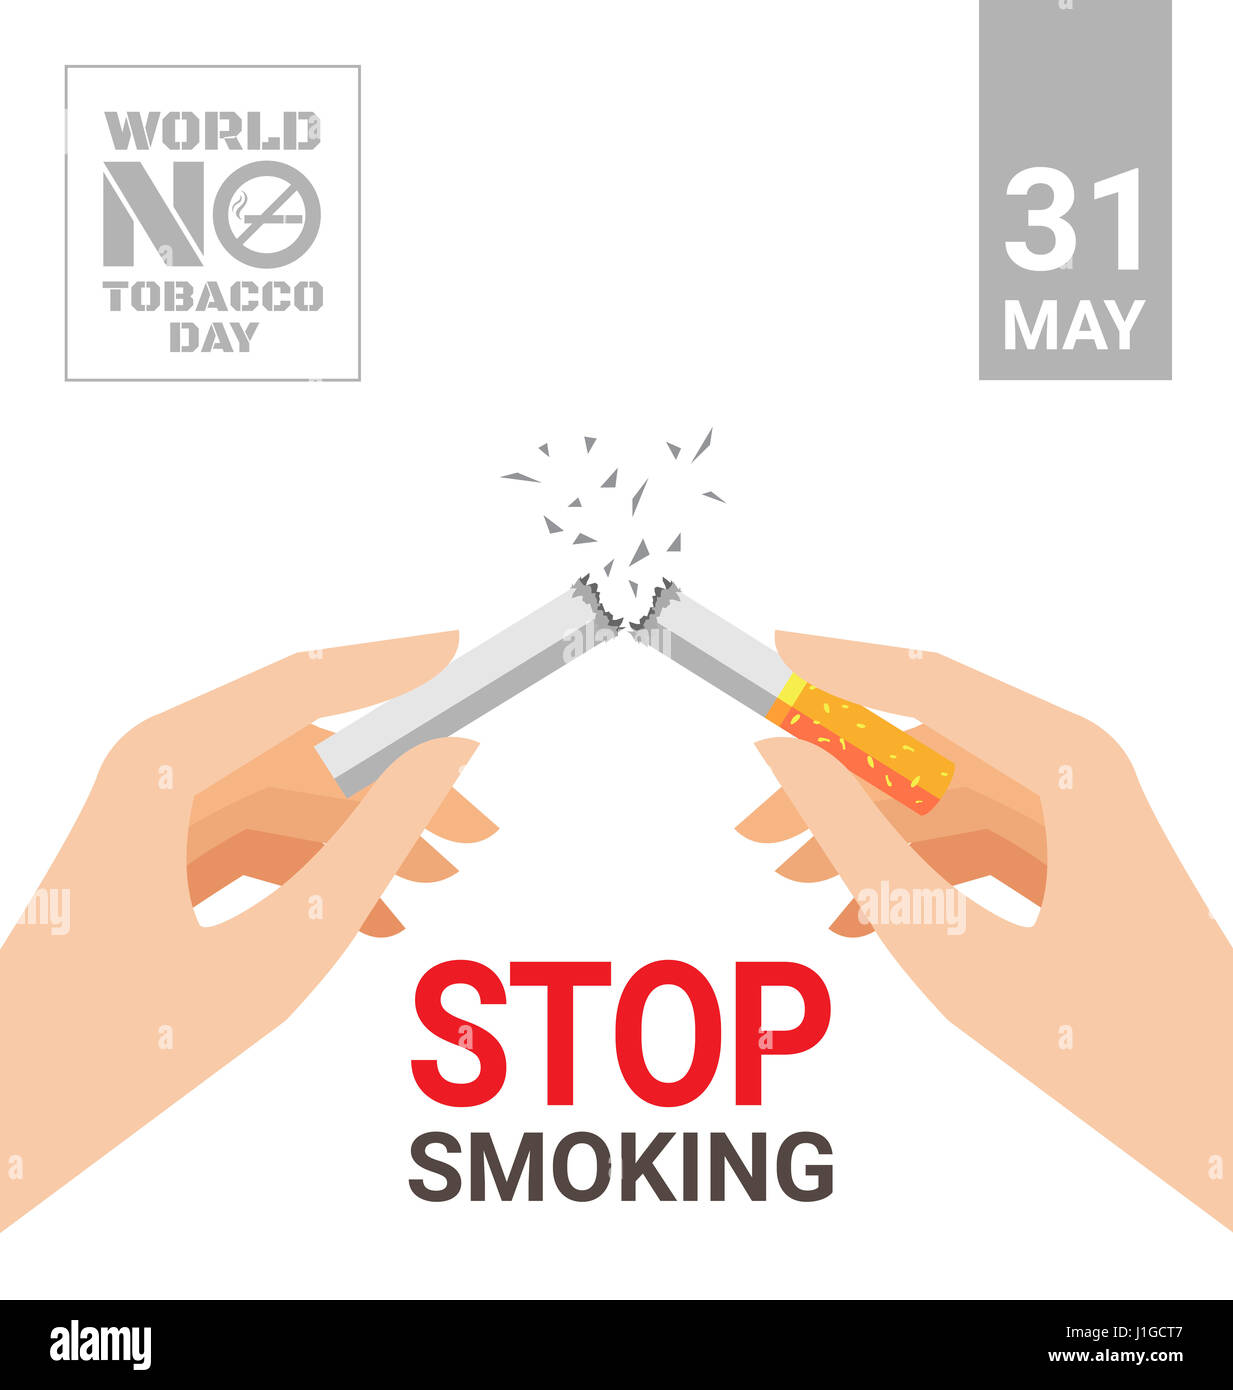 Hand holding a breaking cigarette for World No Tobacco Day poster Stock Photo